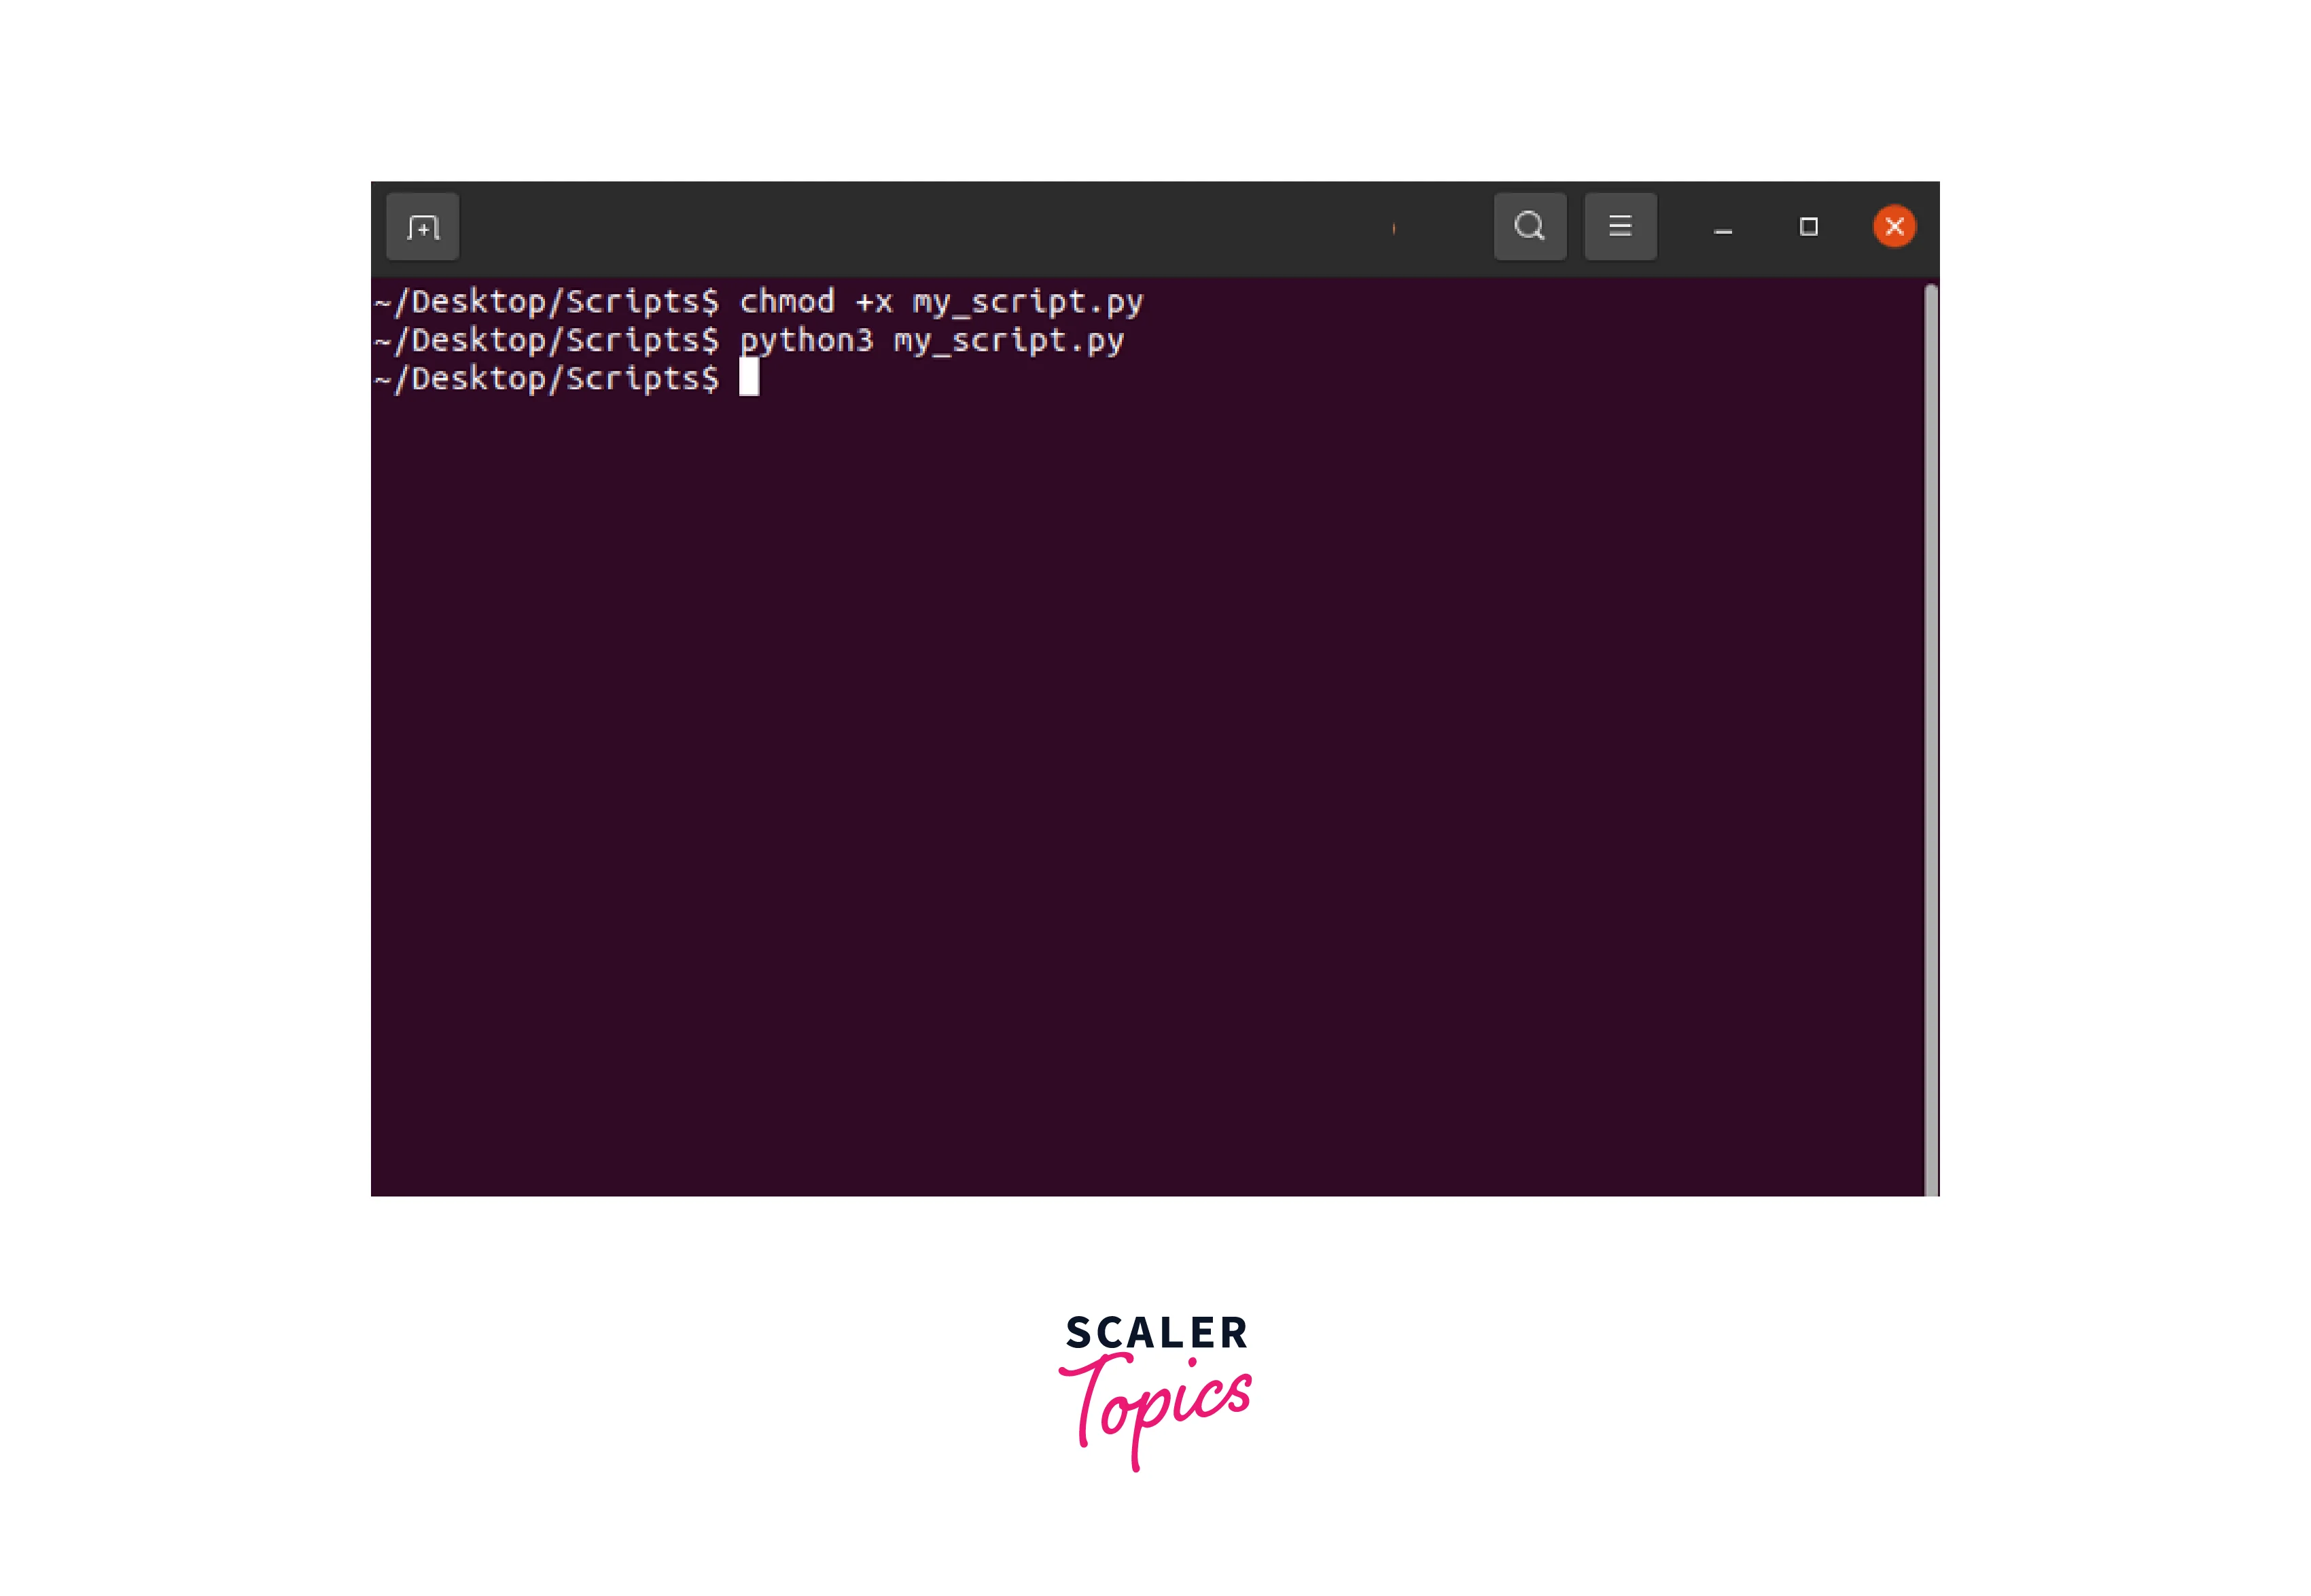 How To Run Python Script in Linux? - Scaler Topics